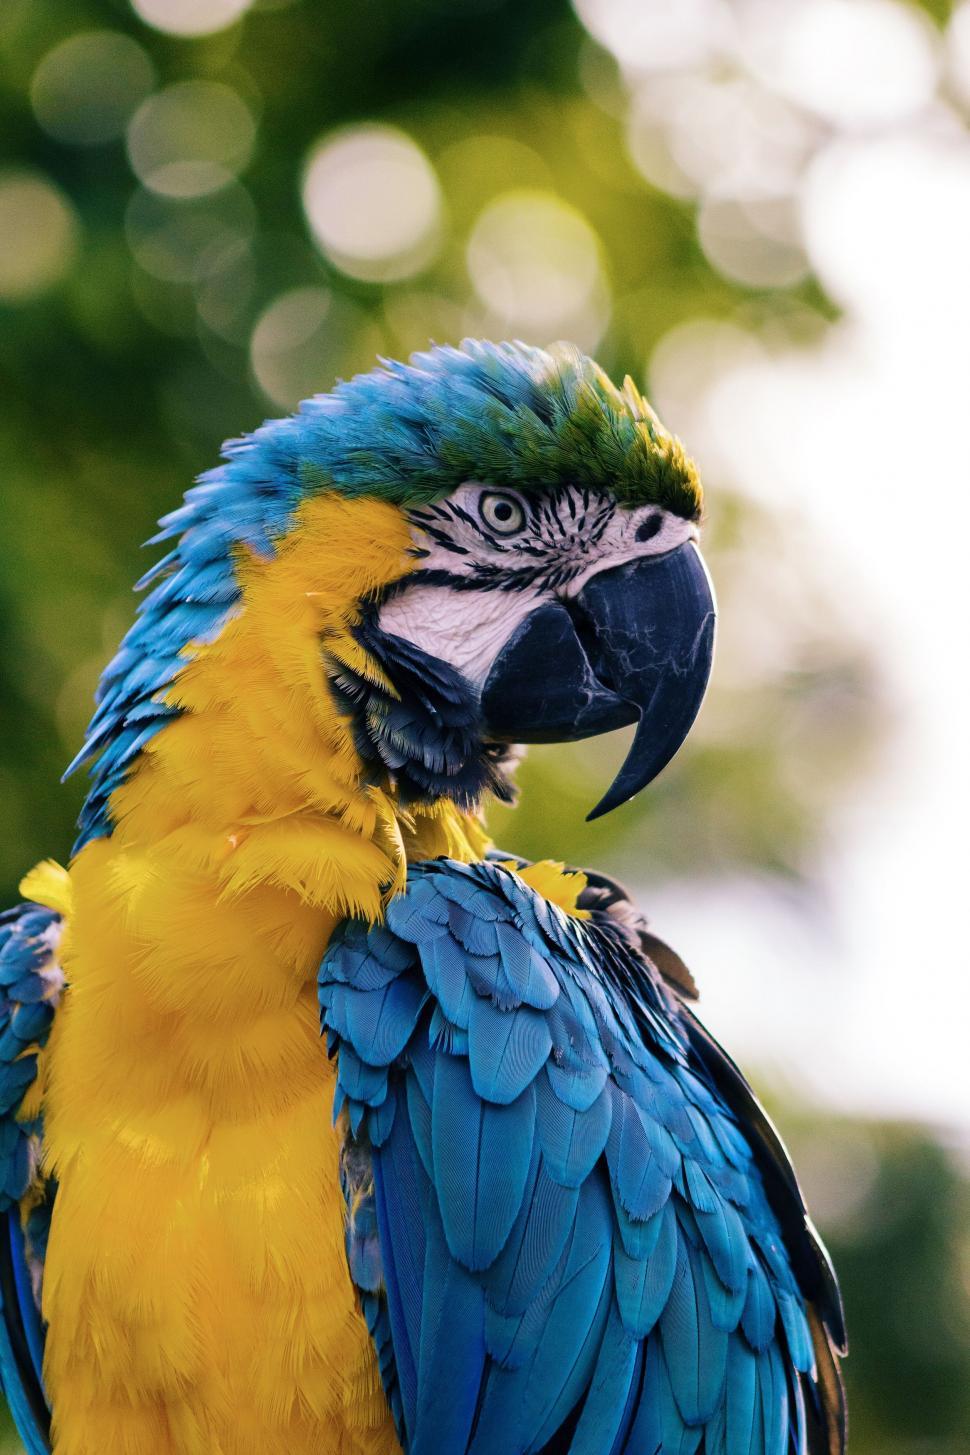 Free Image of Blue and Yellow Parrot Perched on Tree Top 